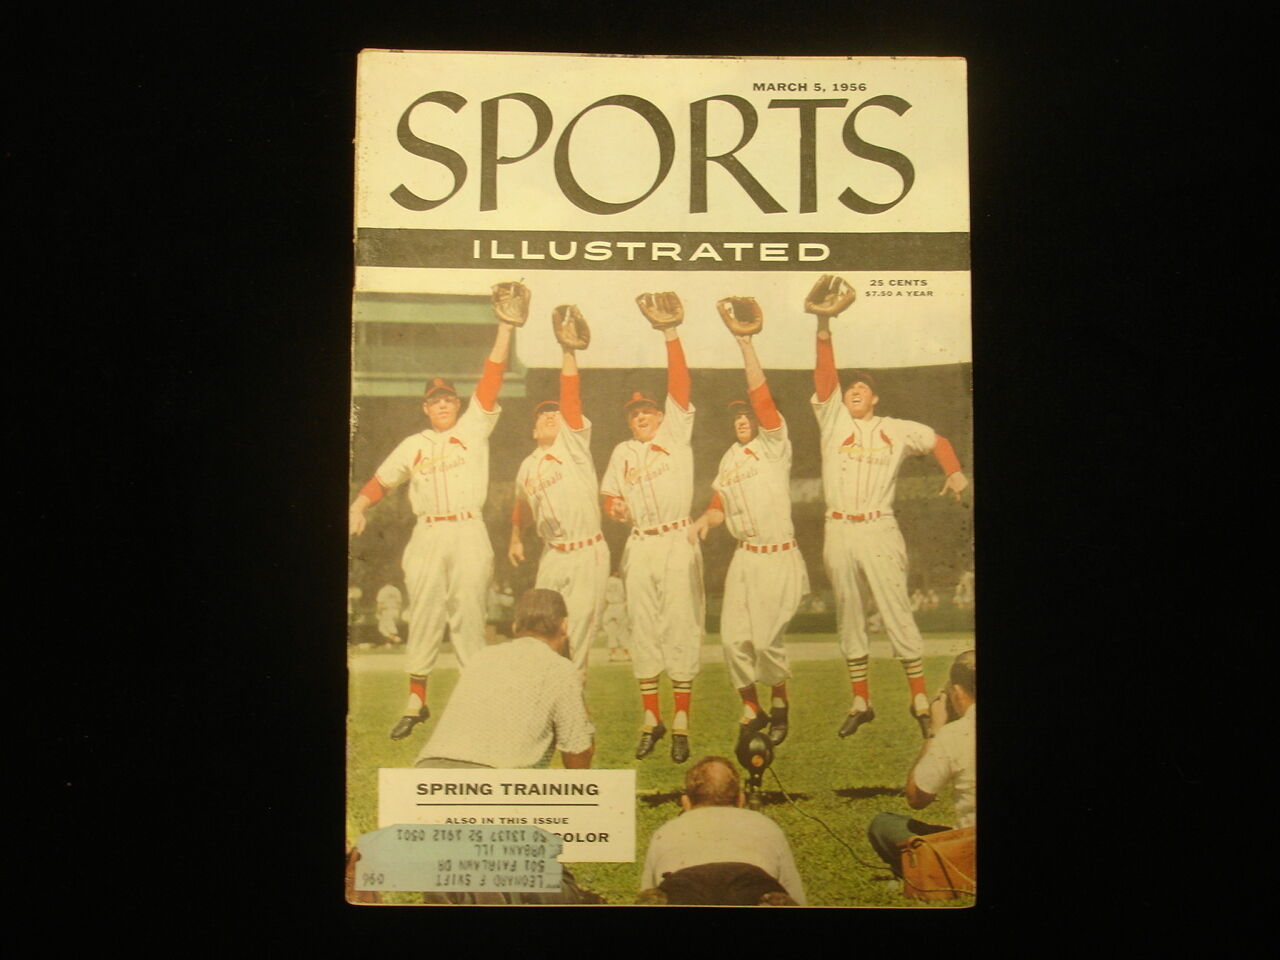 March 5, 1956 Sports Illustrated Magazine - St. Louis Cardinals Cover